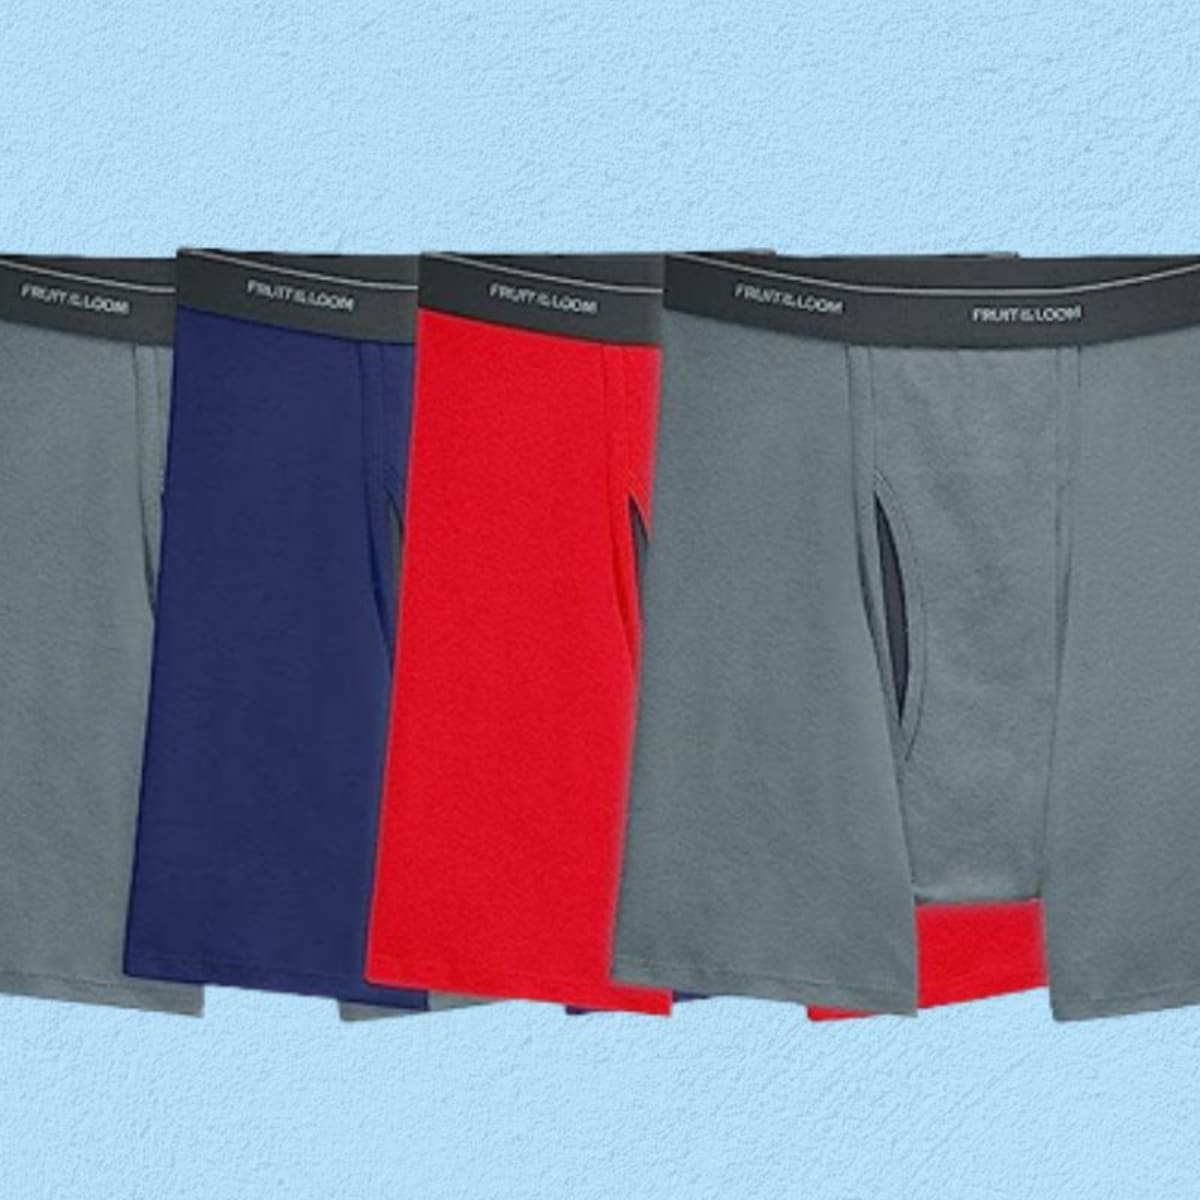 Fruit of the Loom 3-Pack Boxer Briefs Black/Grey at  Men's Clothing  store